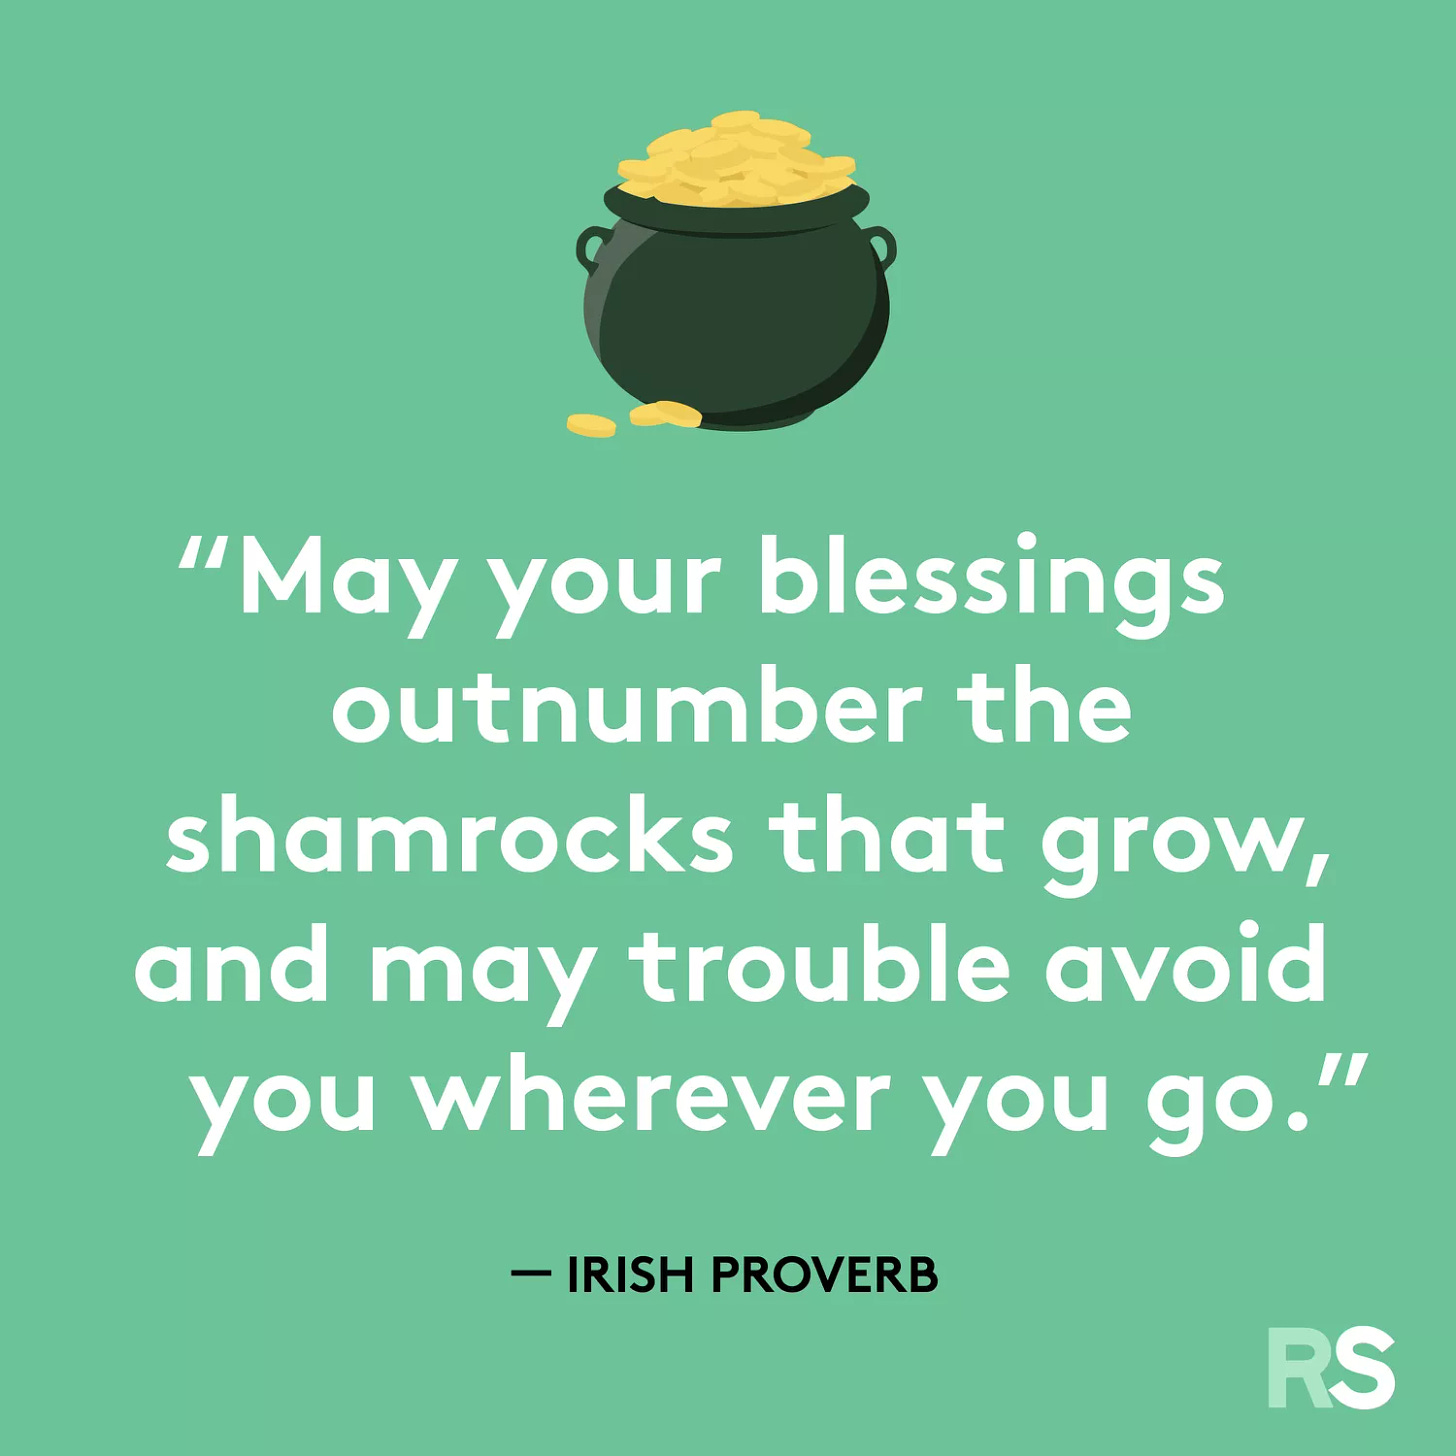 May your blessings outnumber the shamrocks that grow, and may trouble avoid you wherever you go.